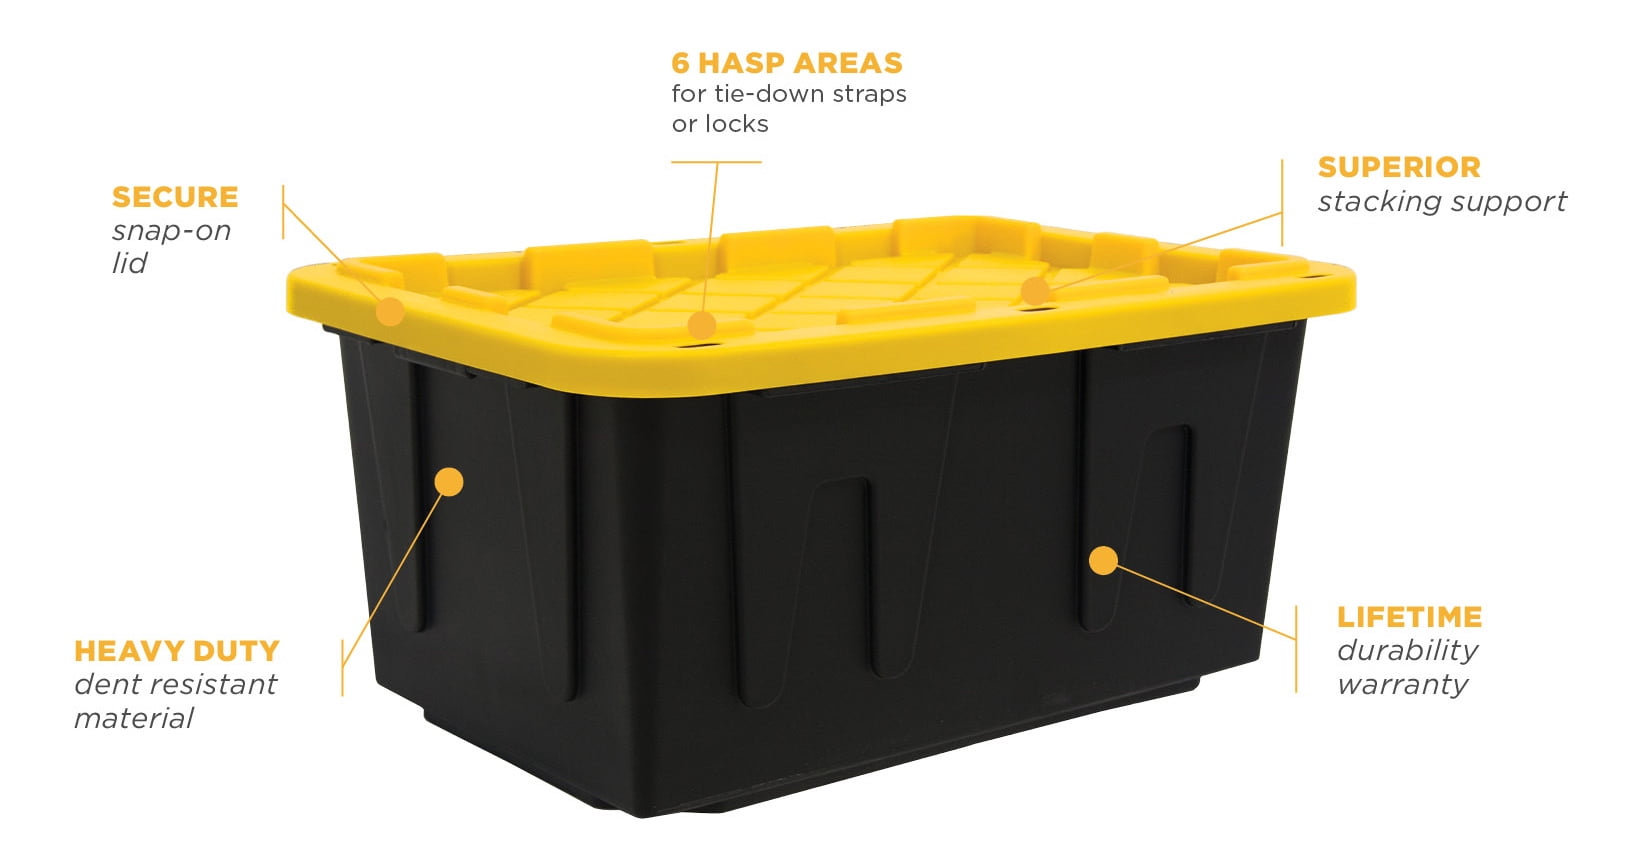 Greenmade Black Storage Bin with Yellow Lid, 27 Gallon - Pallet of 44